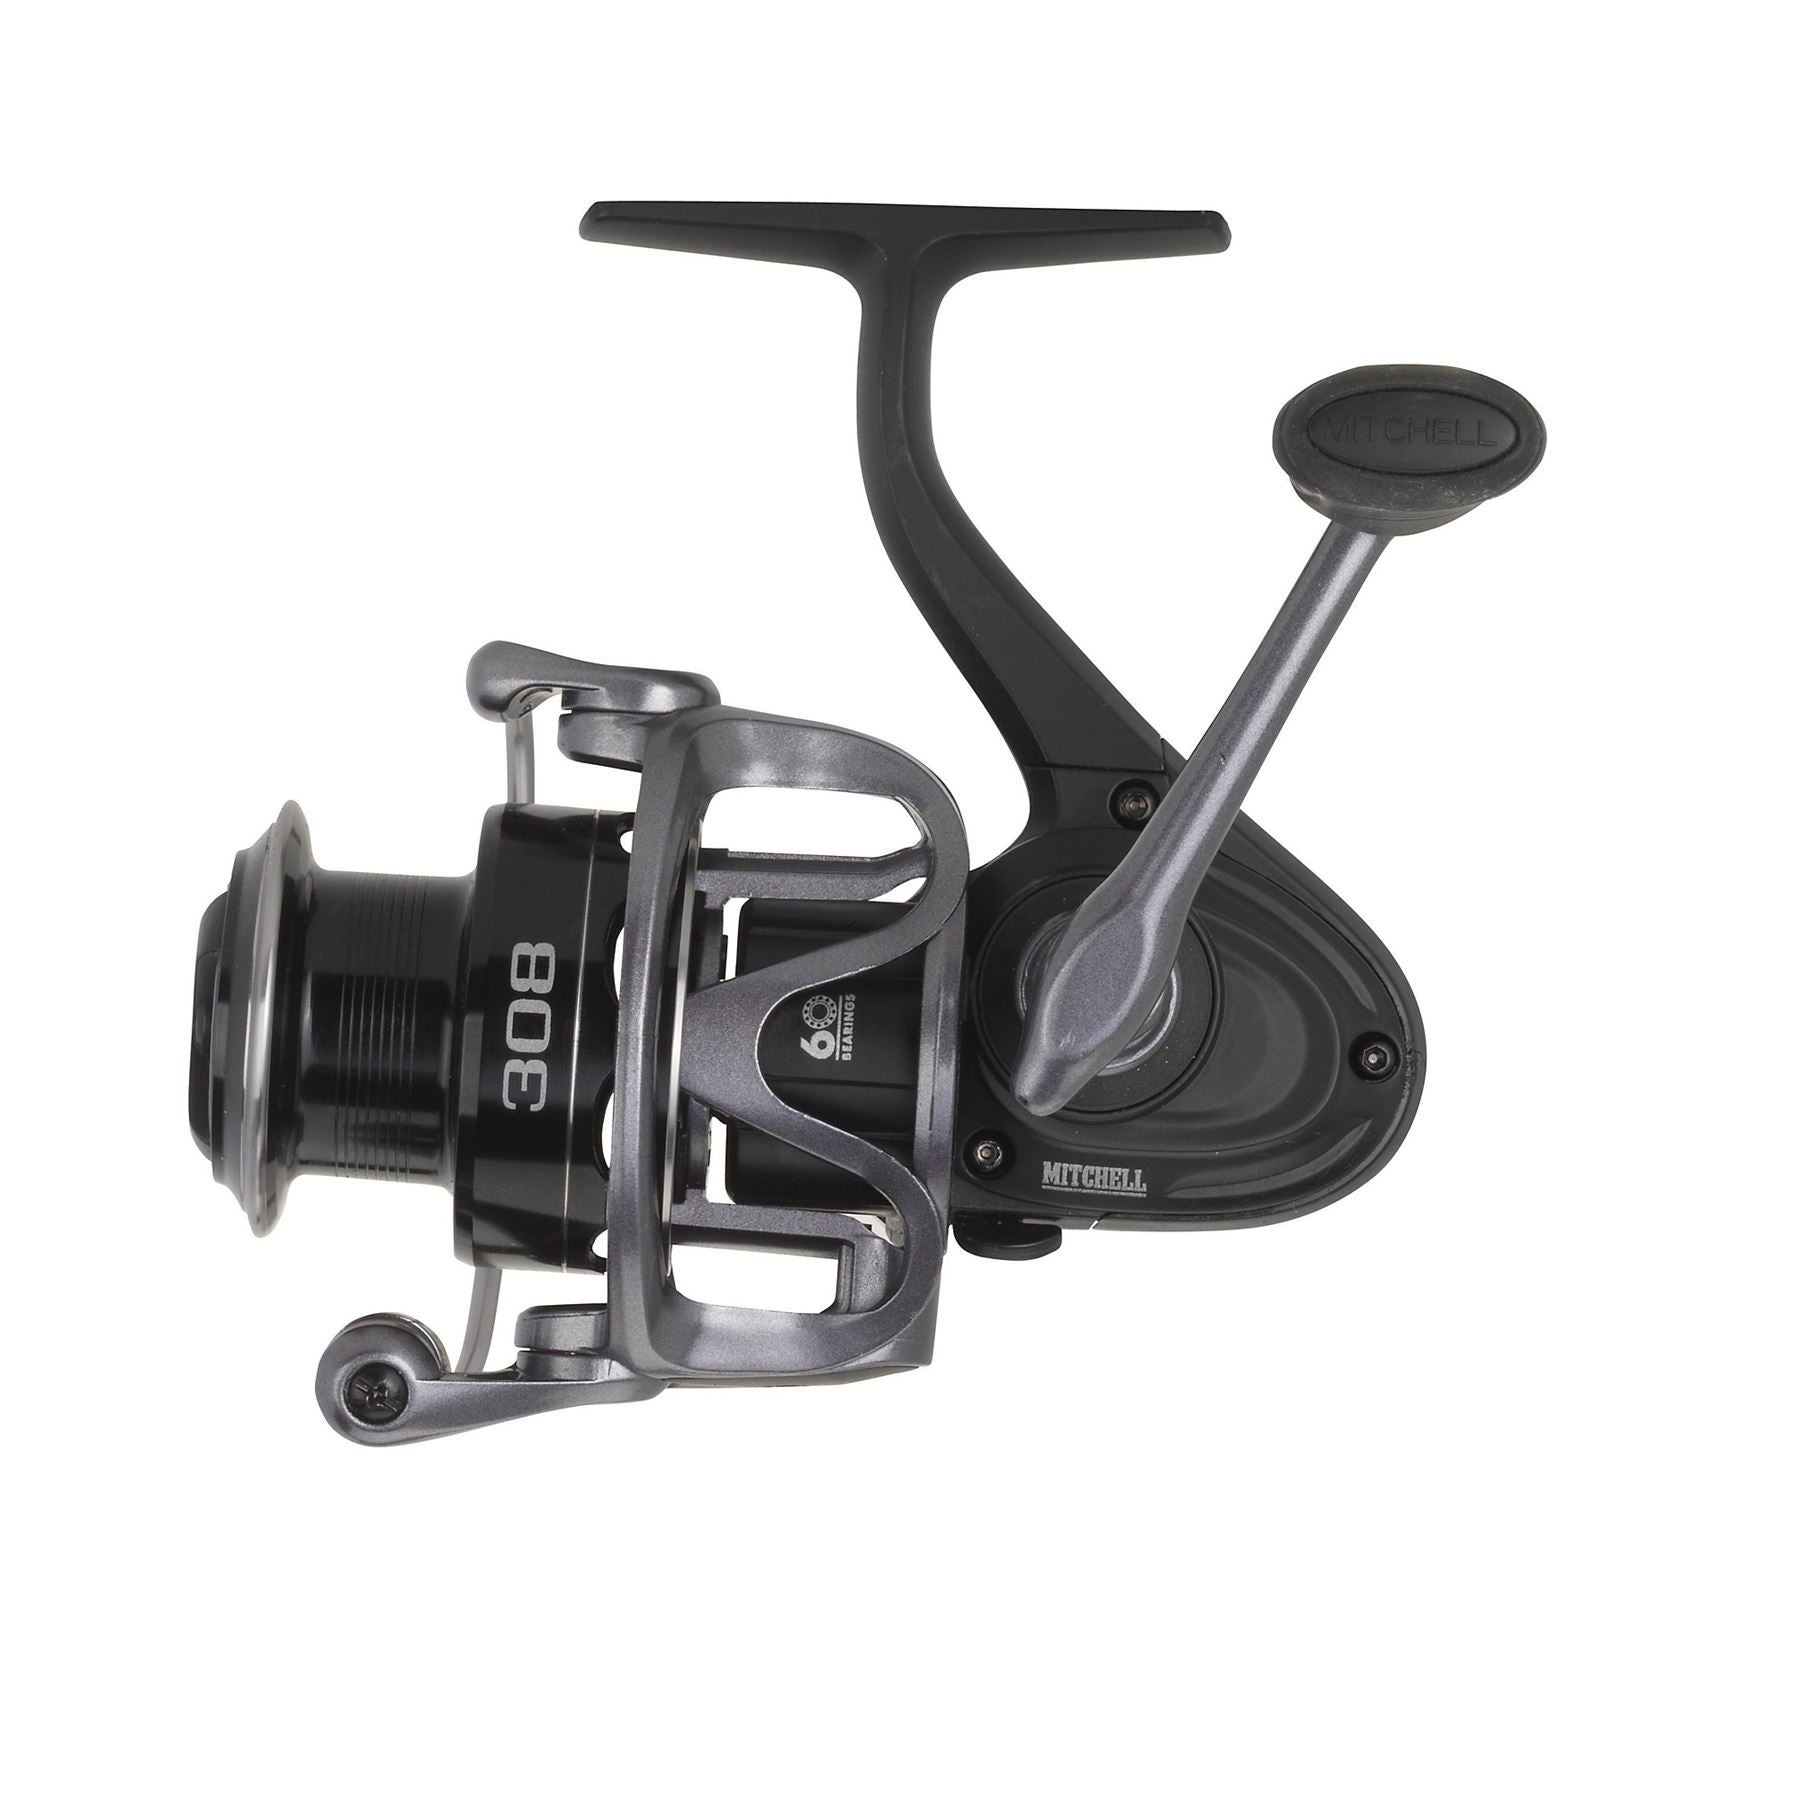 Mitchell 310 – Great Fishing Tackle